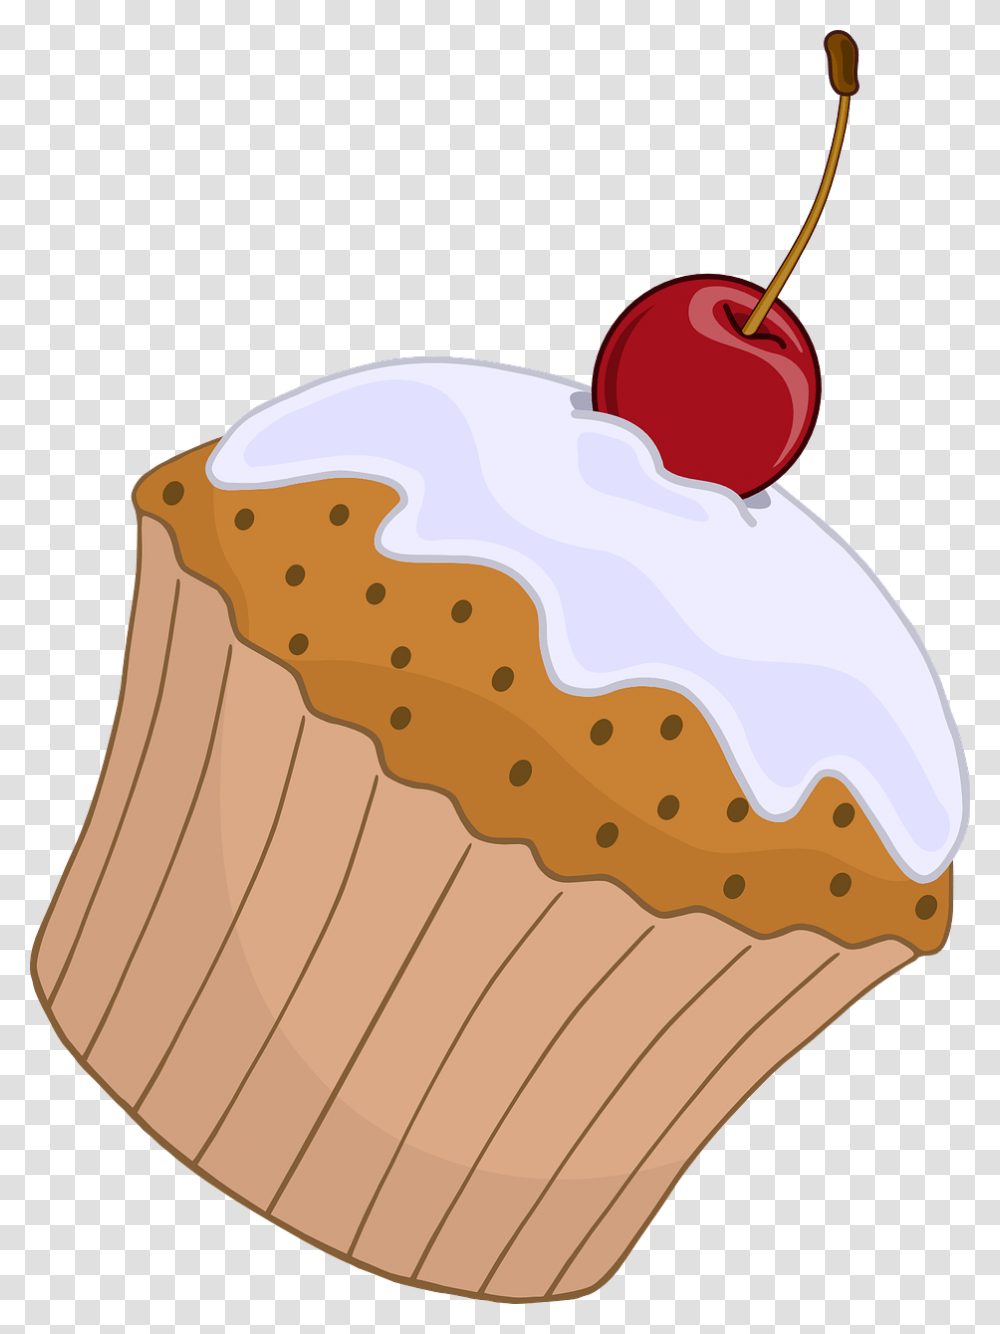 Cupcake Cake Cherry Stalk Icing Frosting Cliparts Muffin, Cream, Dessert, Food, Creme Transparent Png